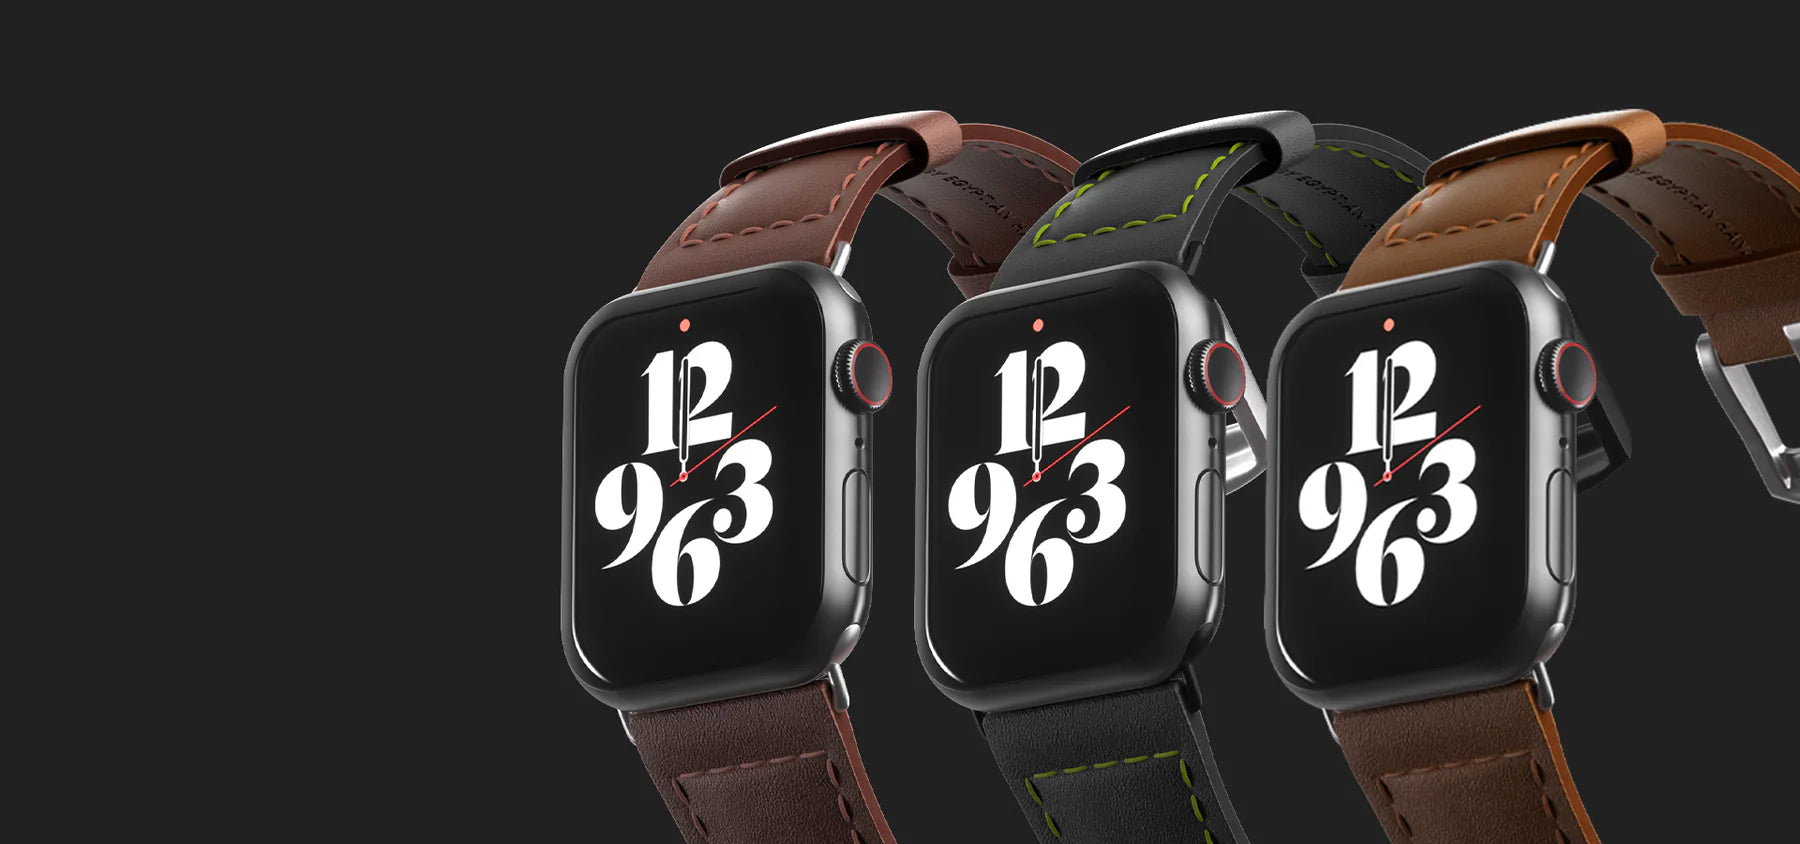 Three trendy apple watches on display on a black background